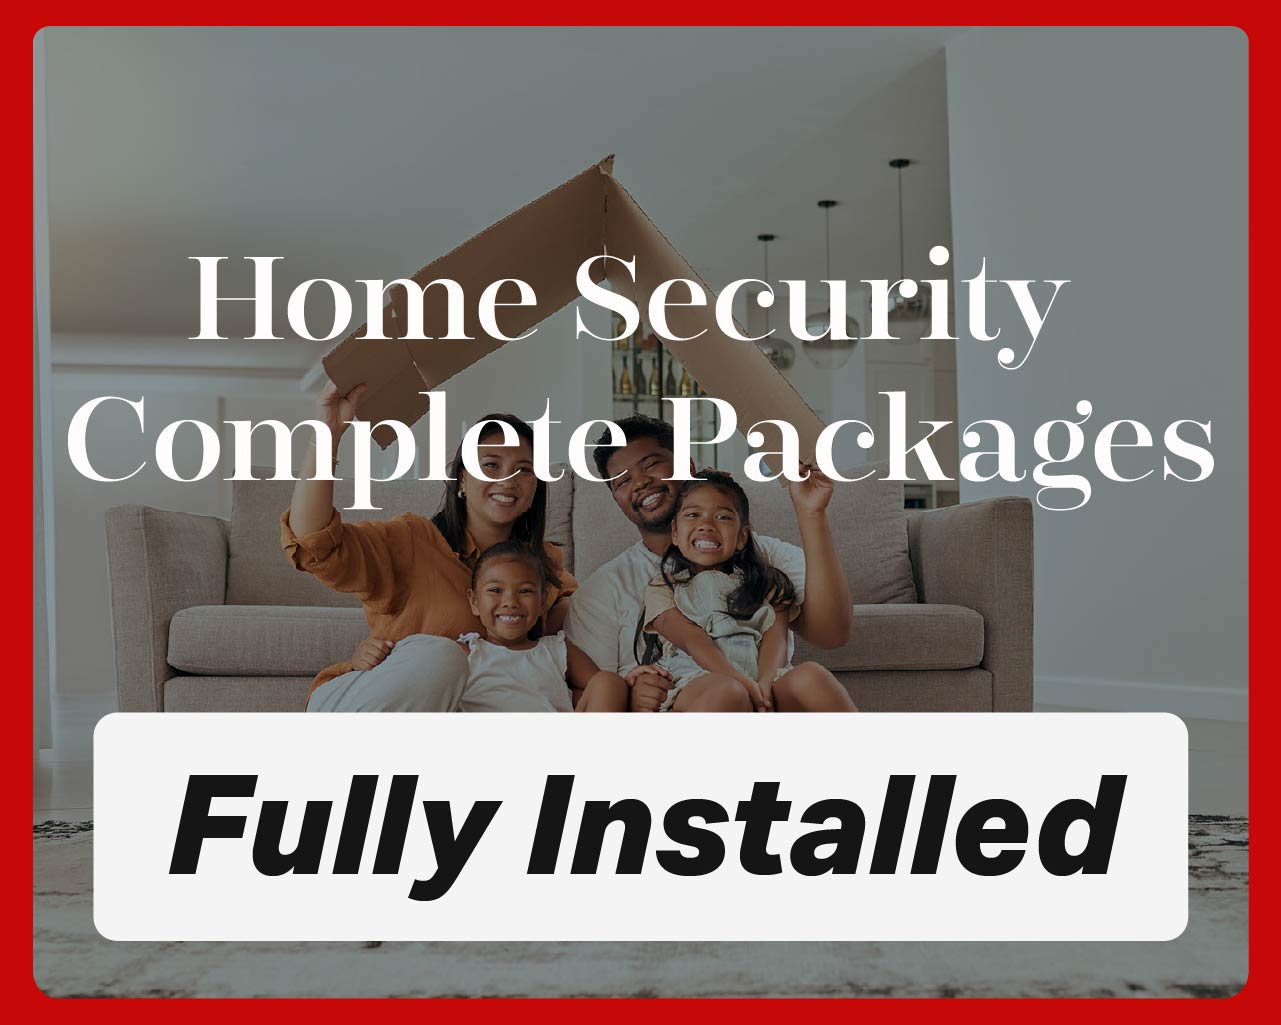 Home Security Complete Packages